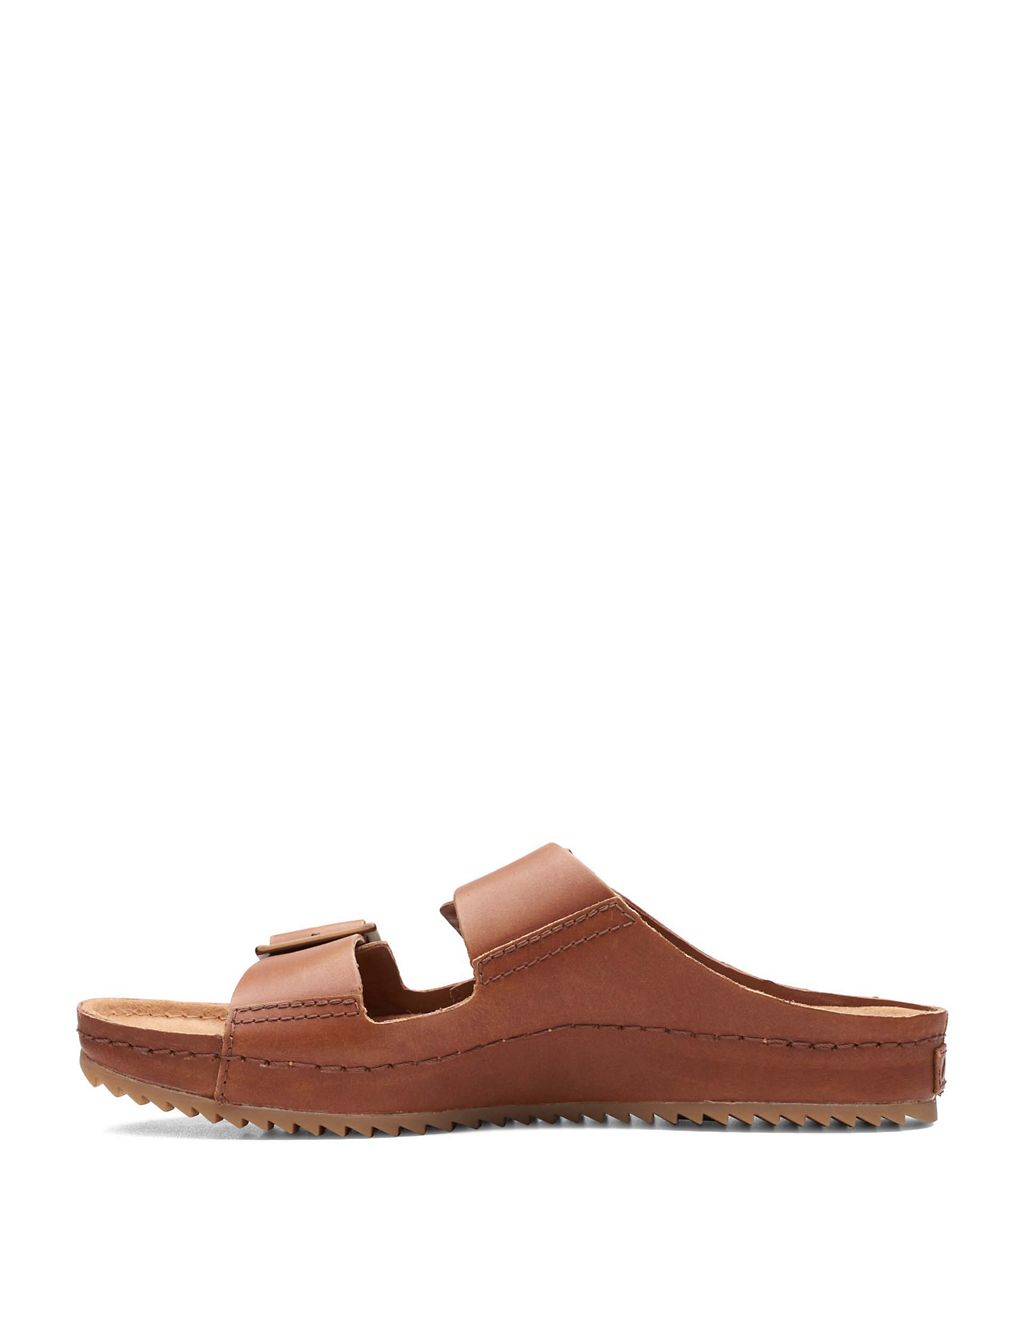 Leather Buckle Flat Sliders 7 of 7